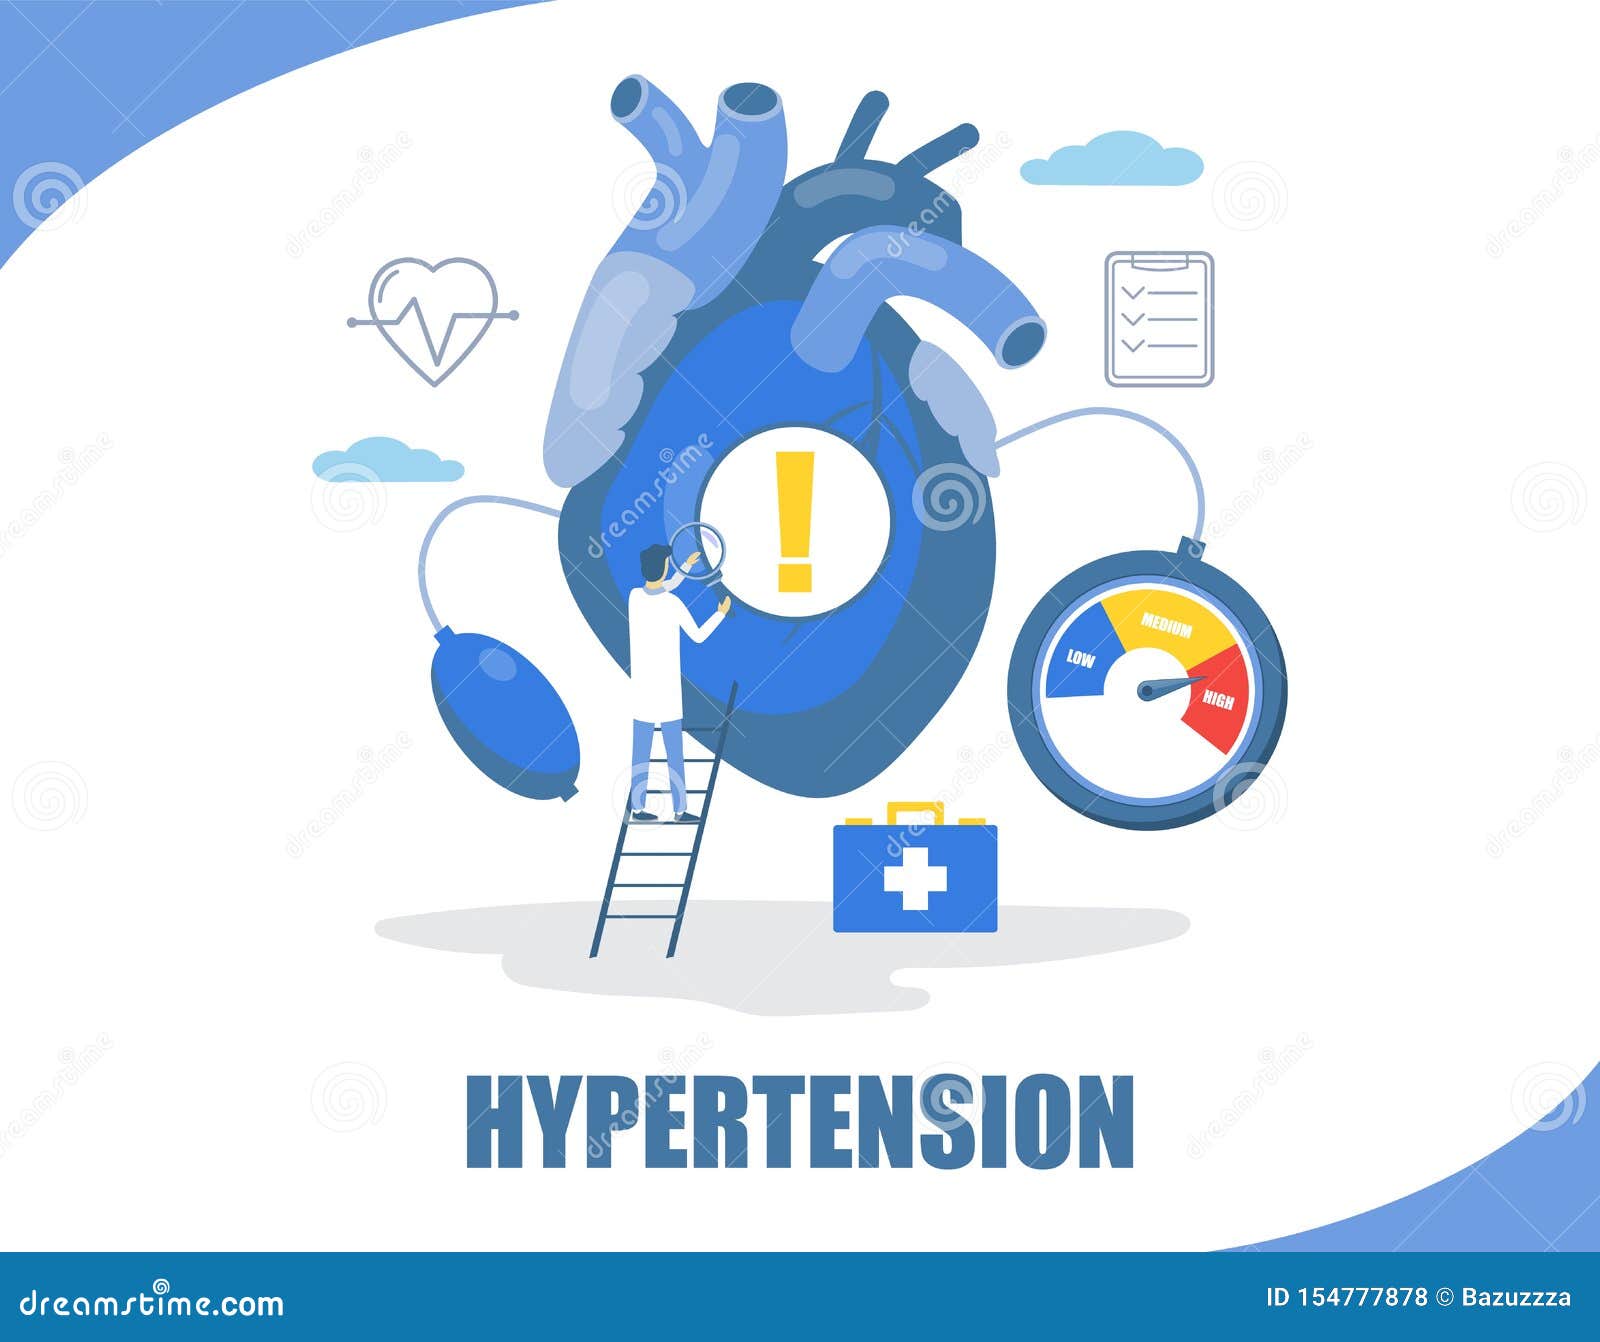 hypertension concept  flat style  